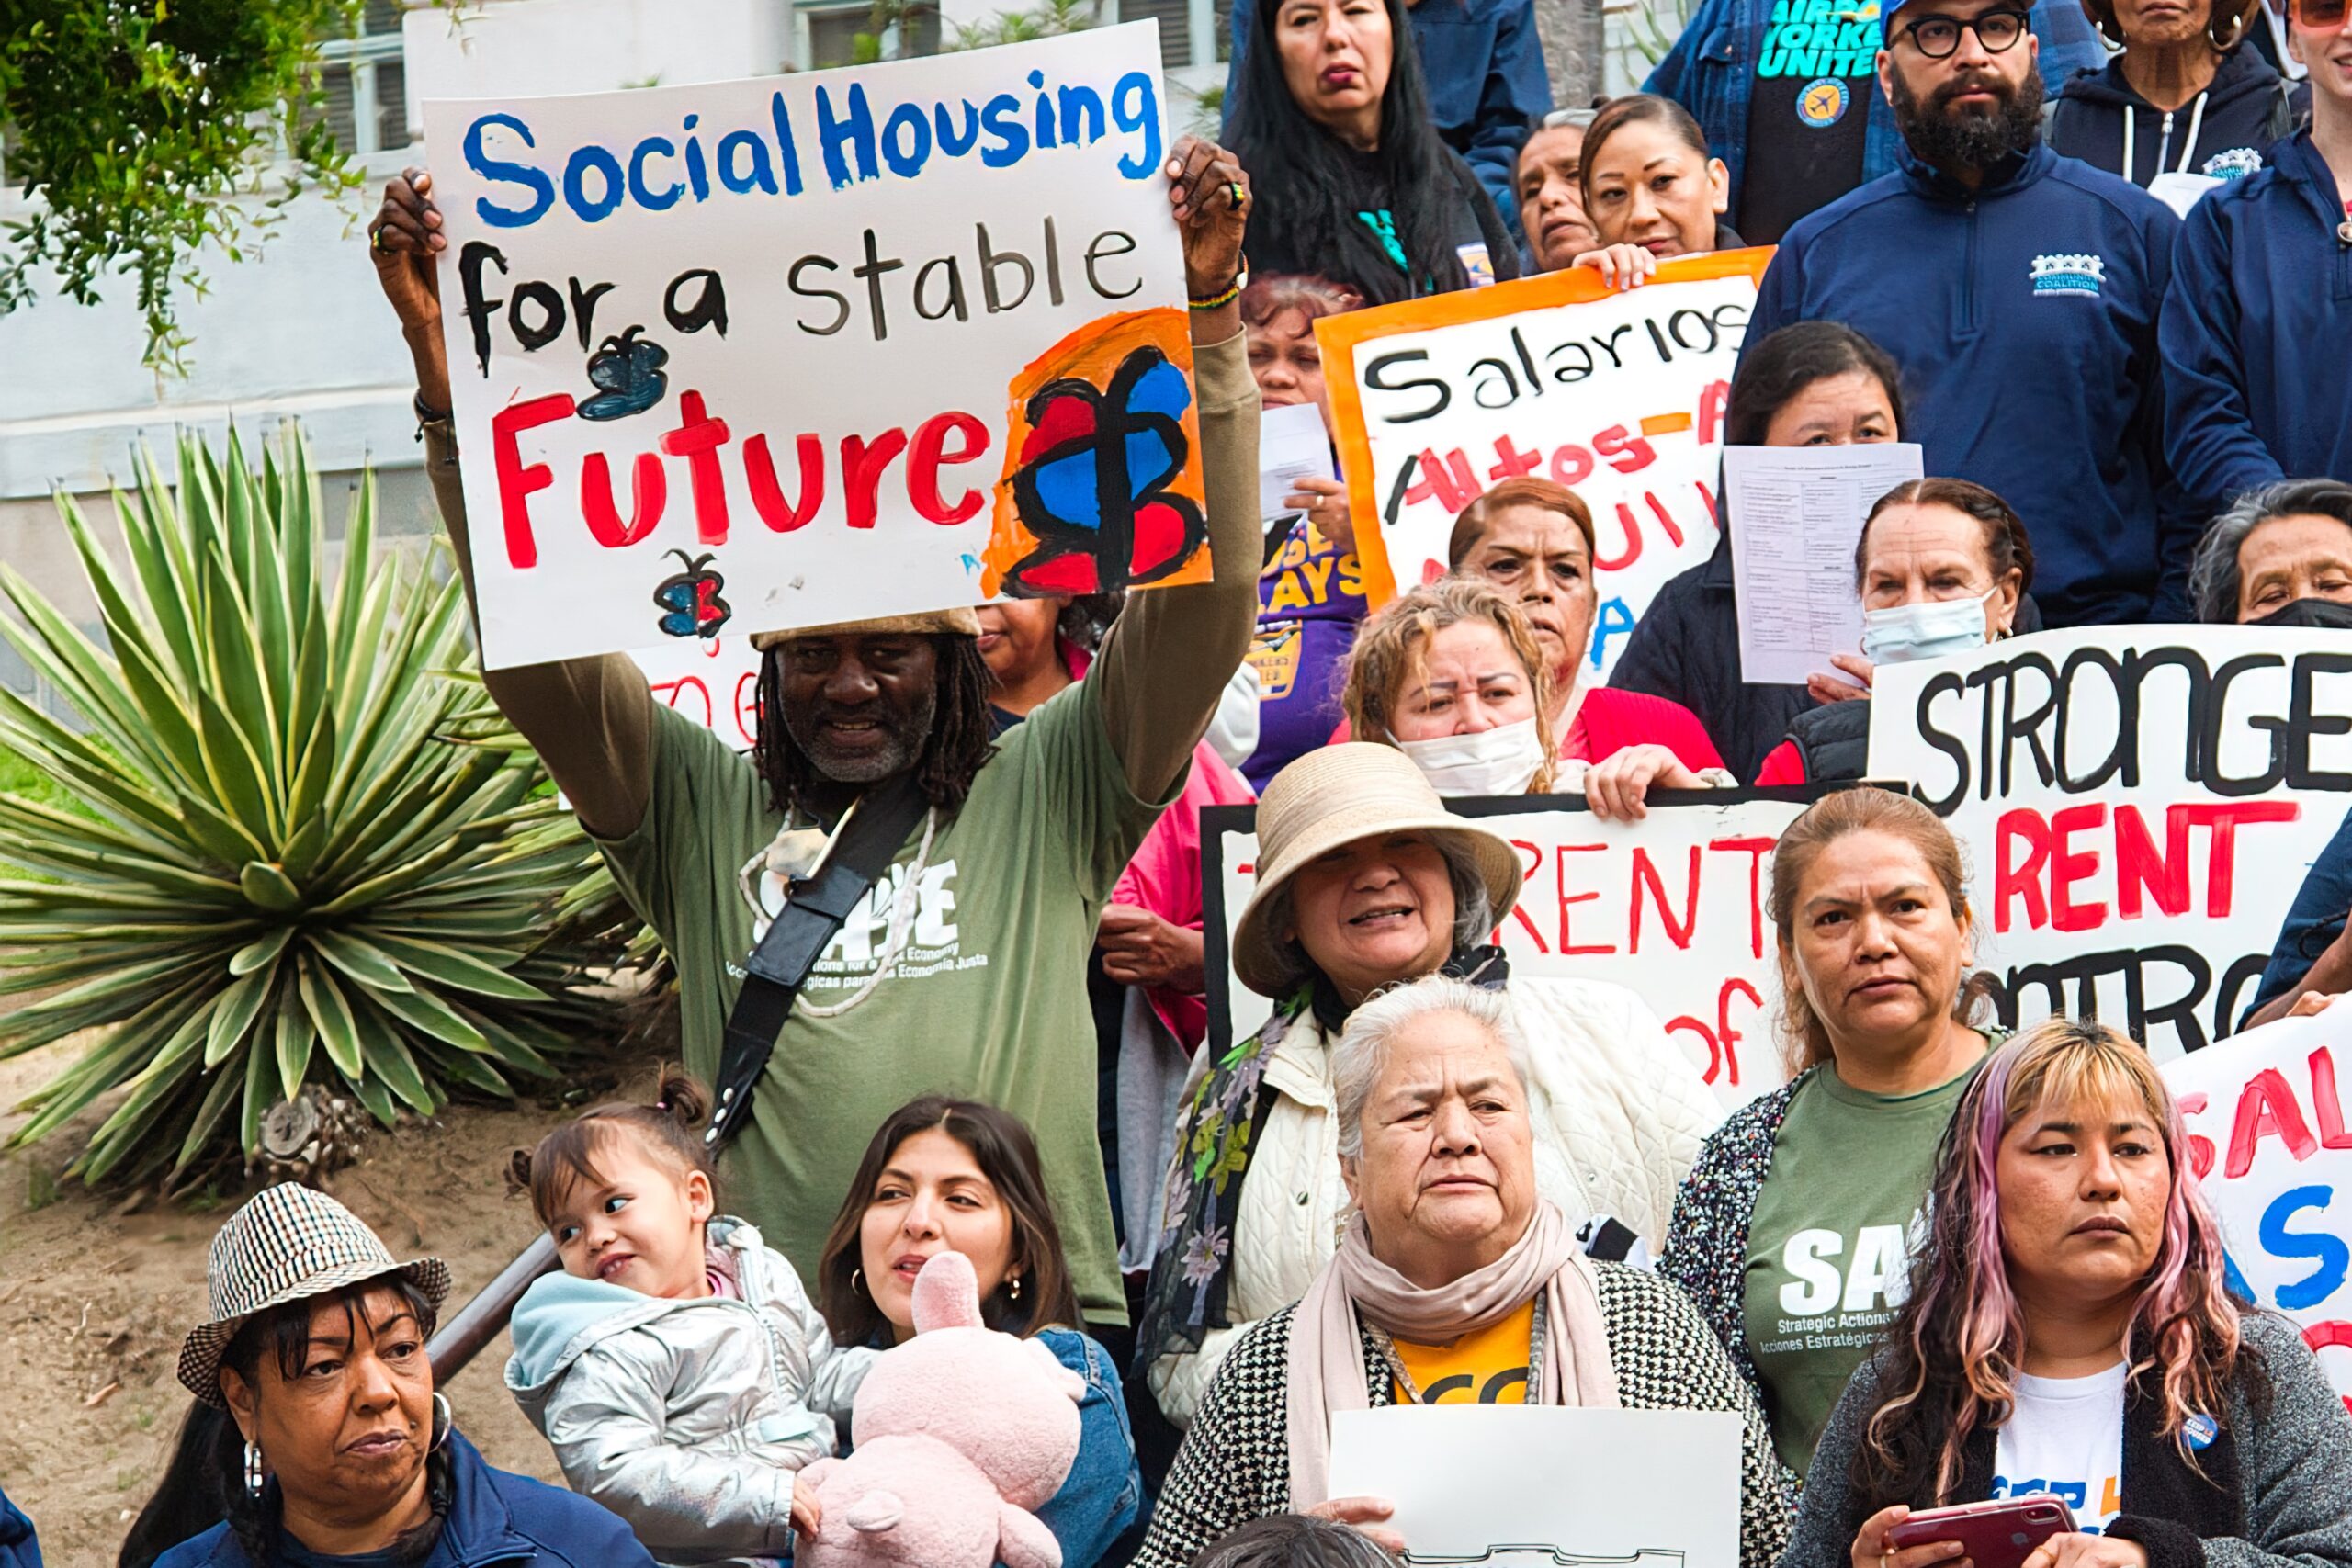 L.A. Is About to Pass an Affordable Housing Streamlining Ordinance. Let’s Make Sure It Protects Tenants.